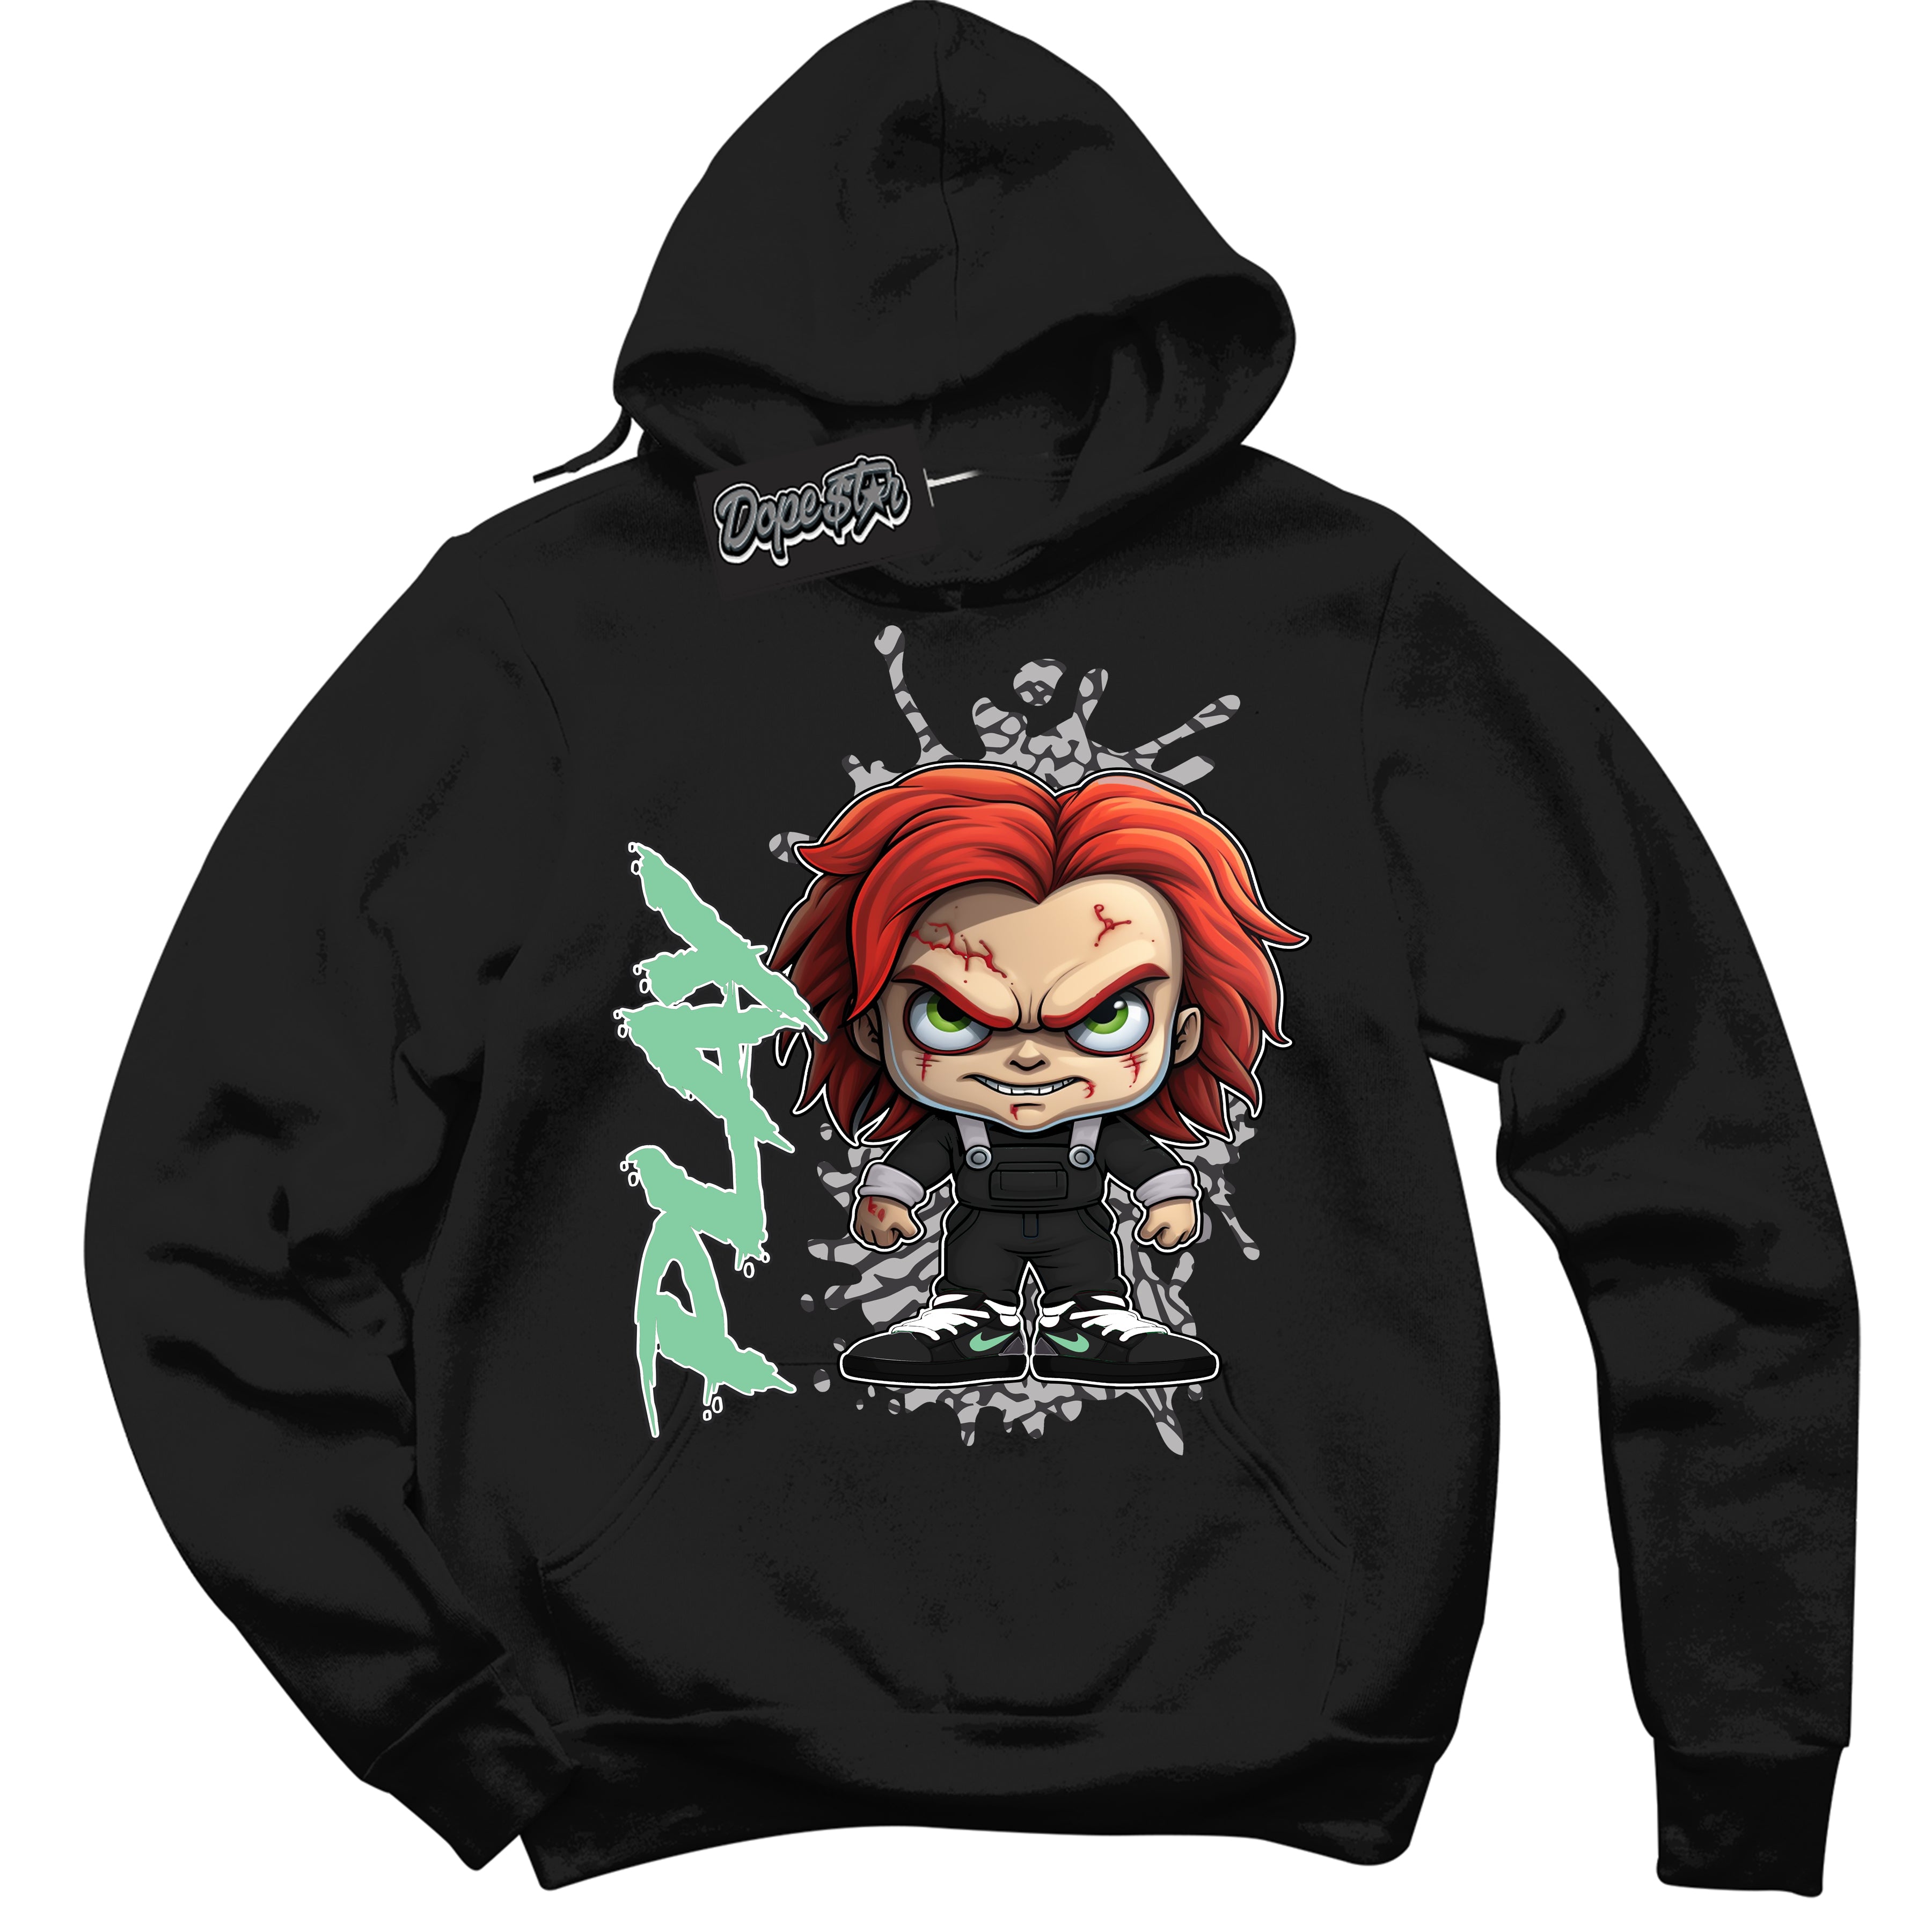 Cool Black Graphic DopeStar Hoodie with “ Chucky Play “ print, that perfectly matches Green Glow 3S sneakers